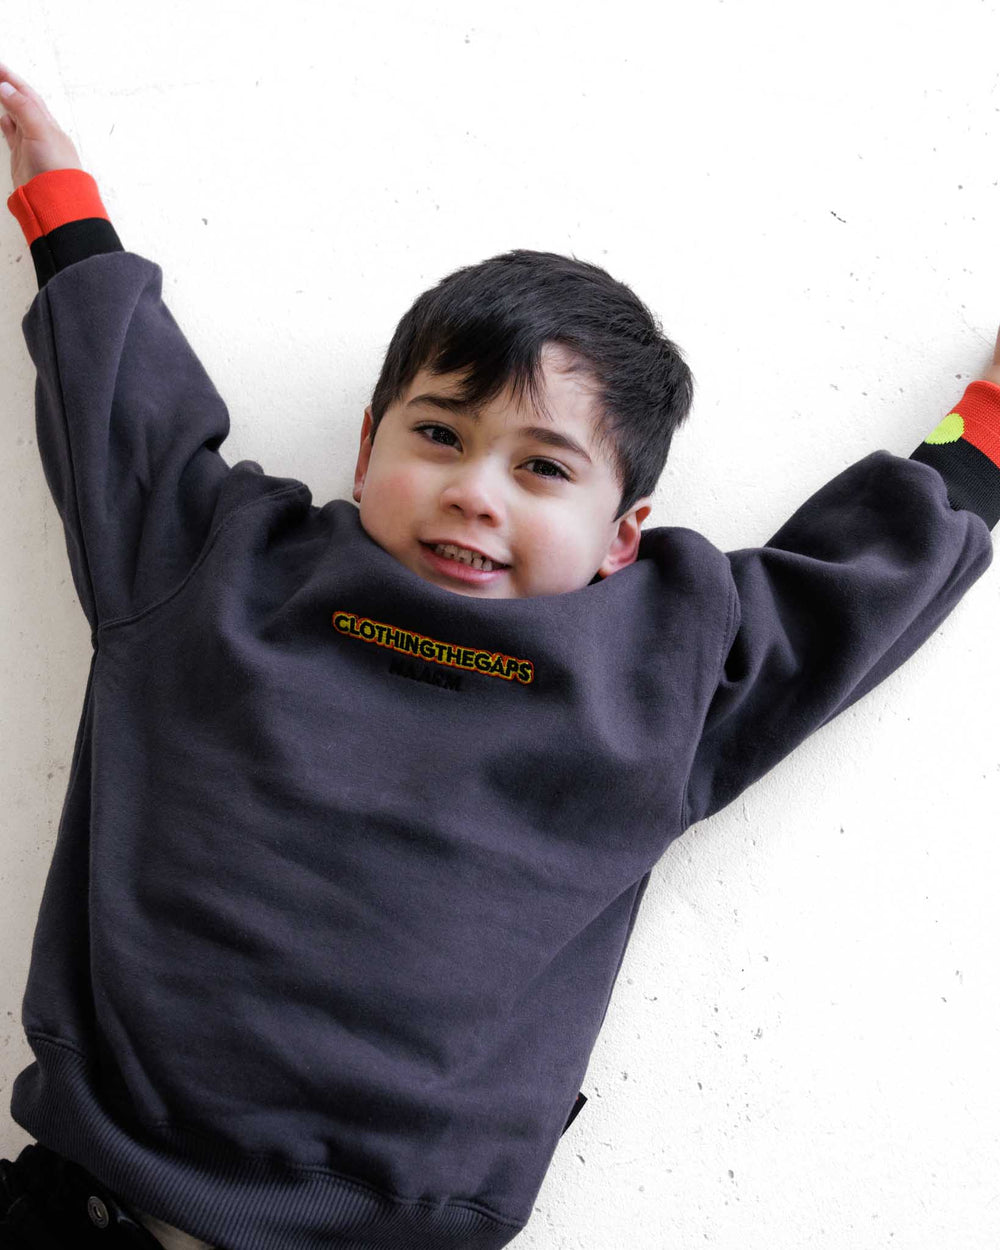 Clothing The Gaps. Kids Charcoal Crew Jumper. Charcoal dark grey crew neck jumper. With black, yellow and red 'Clothing the gaps' and the word 'Narrm' embroidered on the front of crewneck.' The wrist cuffs of the crew have a woven aboriginal flag on them. 